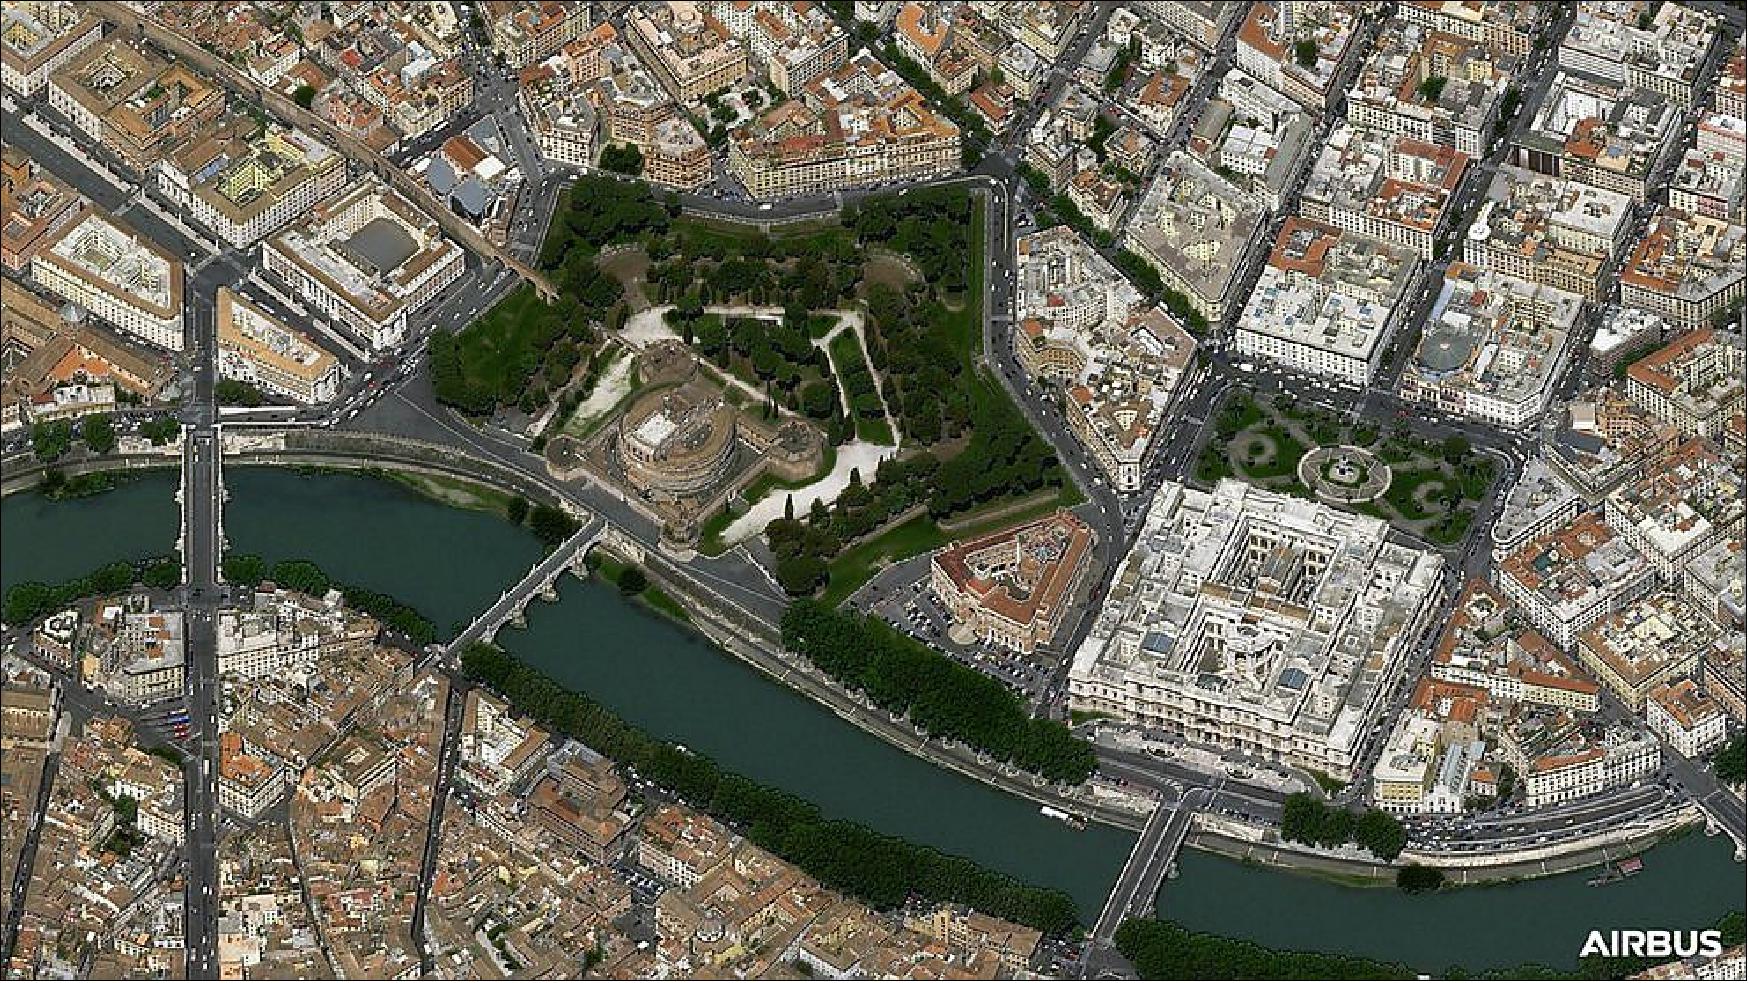 Figure 14: Castel Sant'Angelo, Rome, Italy, at 30 cm native resolution by Pleiades Neo 3 satellite (image credit: Airbus)